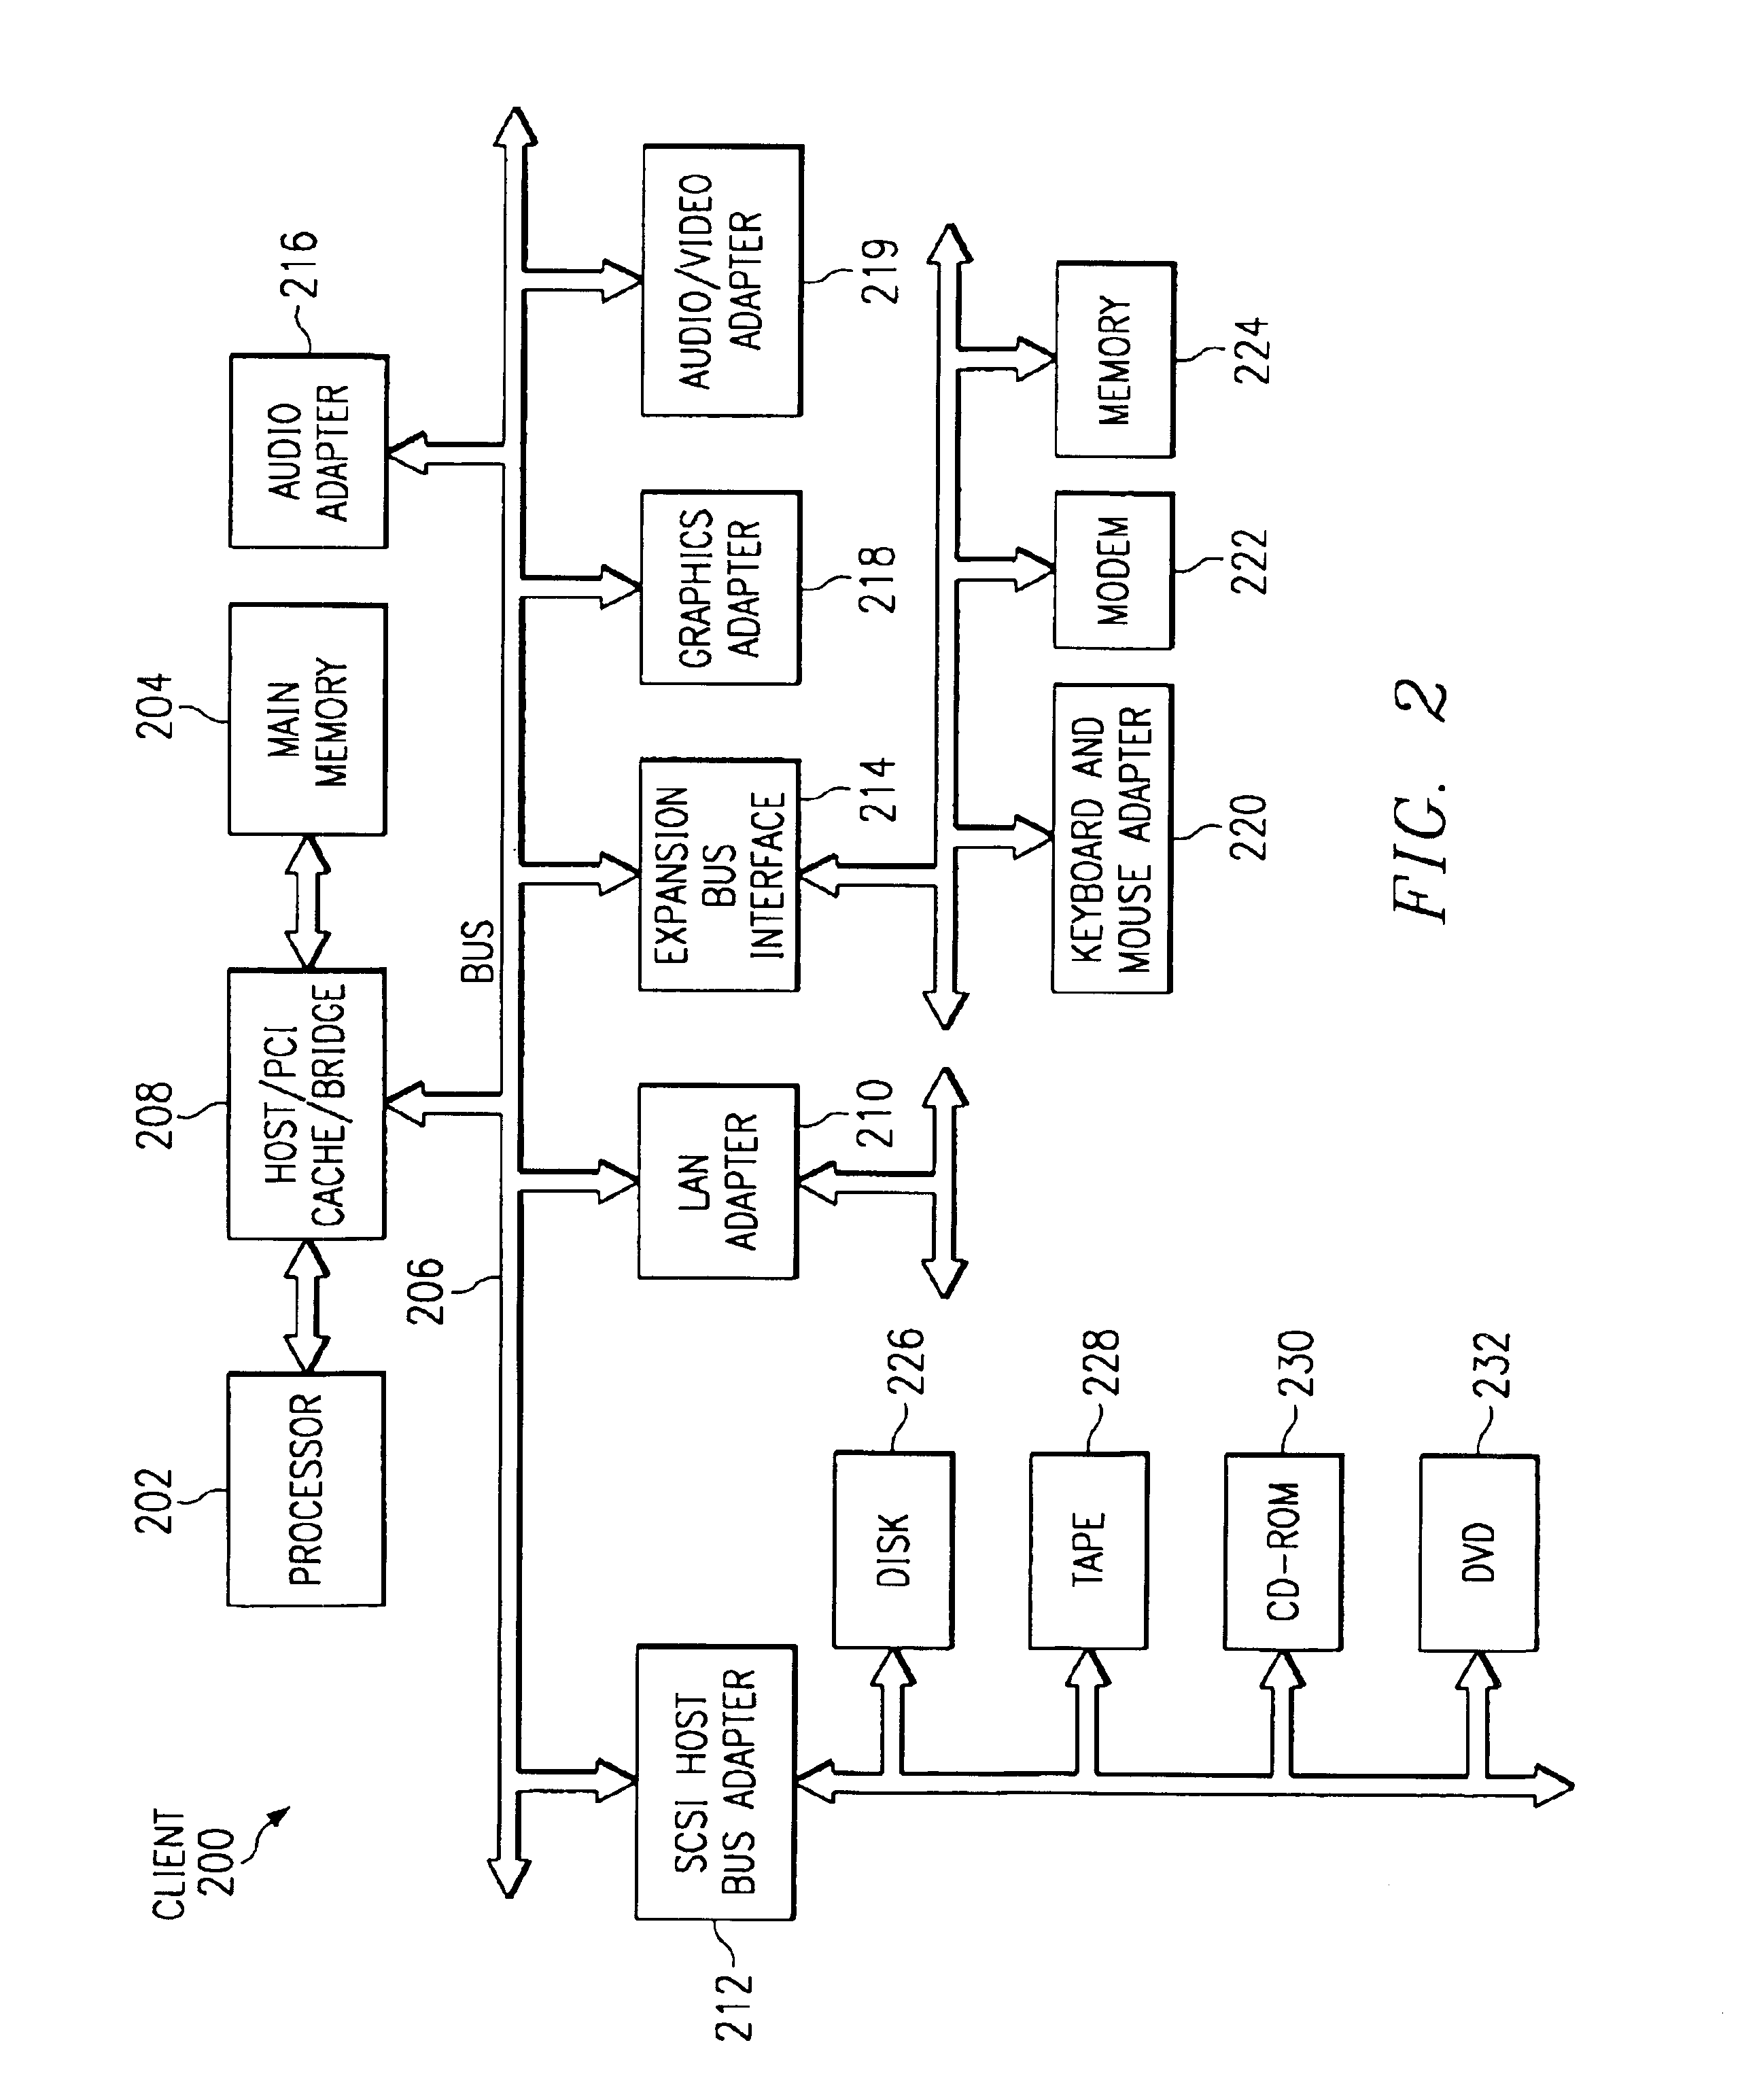 Logically partitioned processing system having hypervisor for creating a new translation table in response to OS request to directly access the non-assignable resource